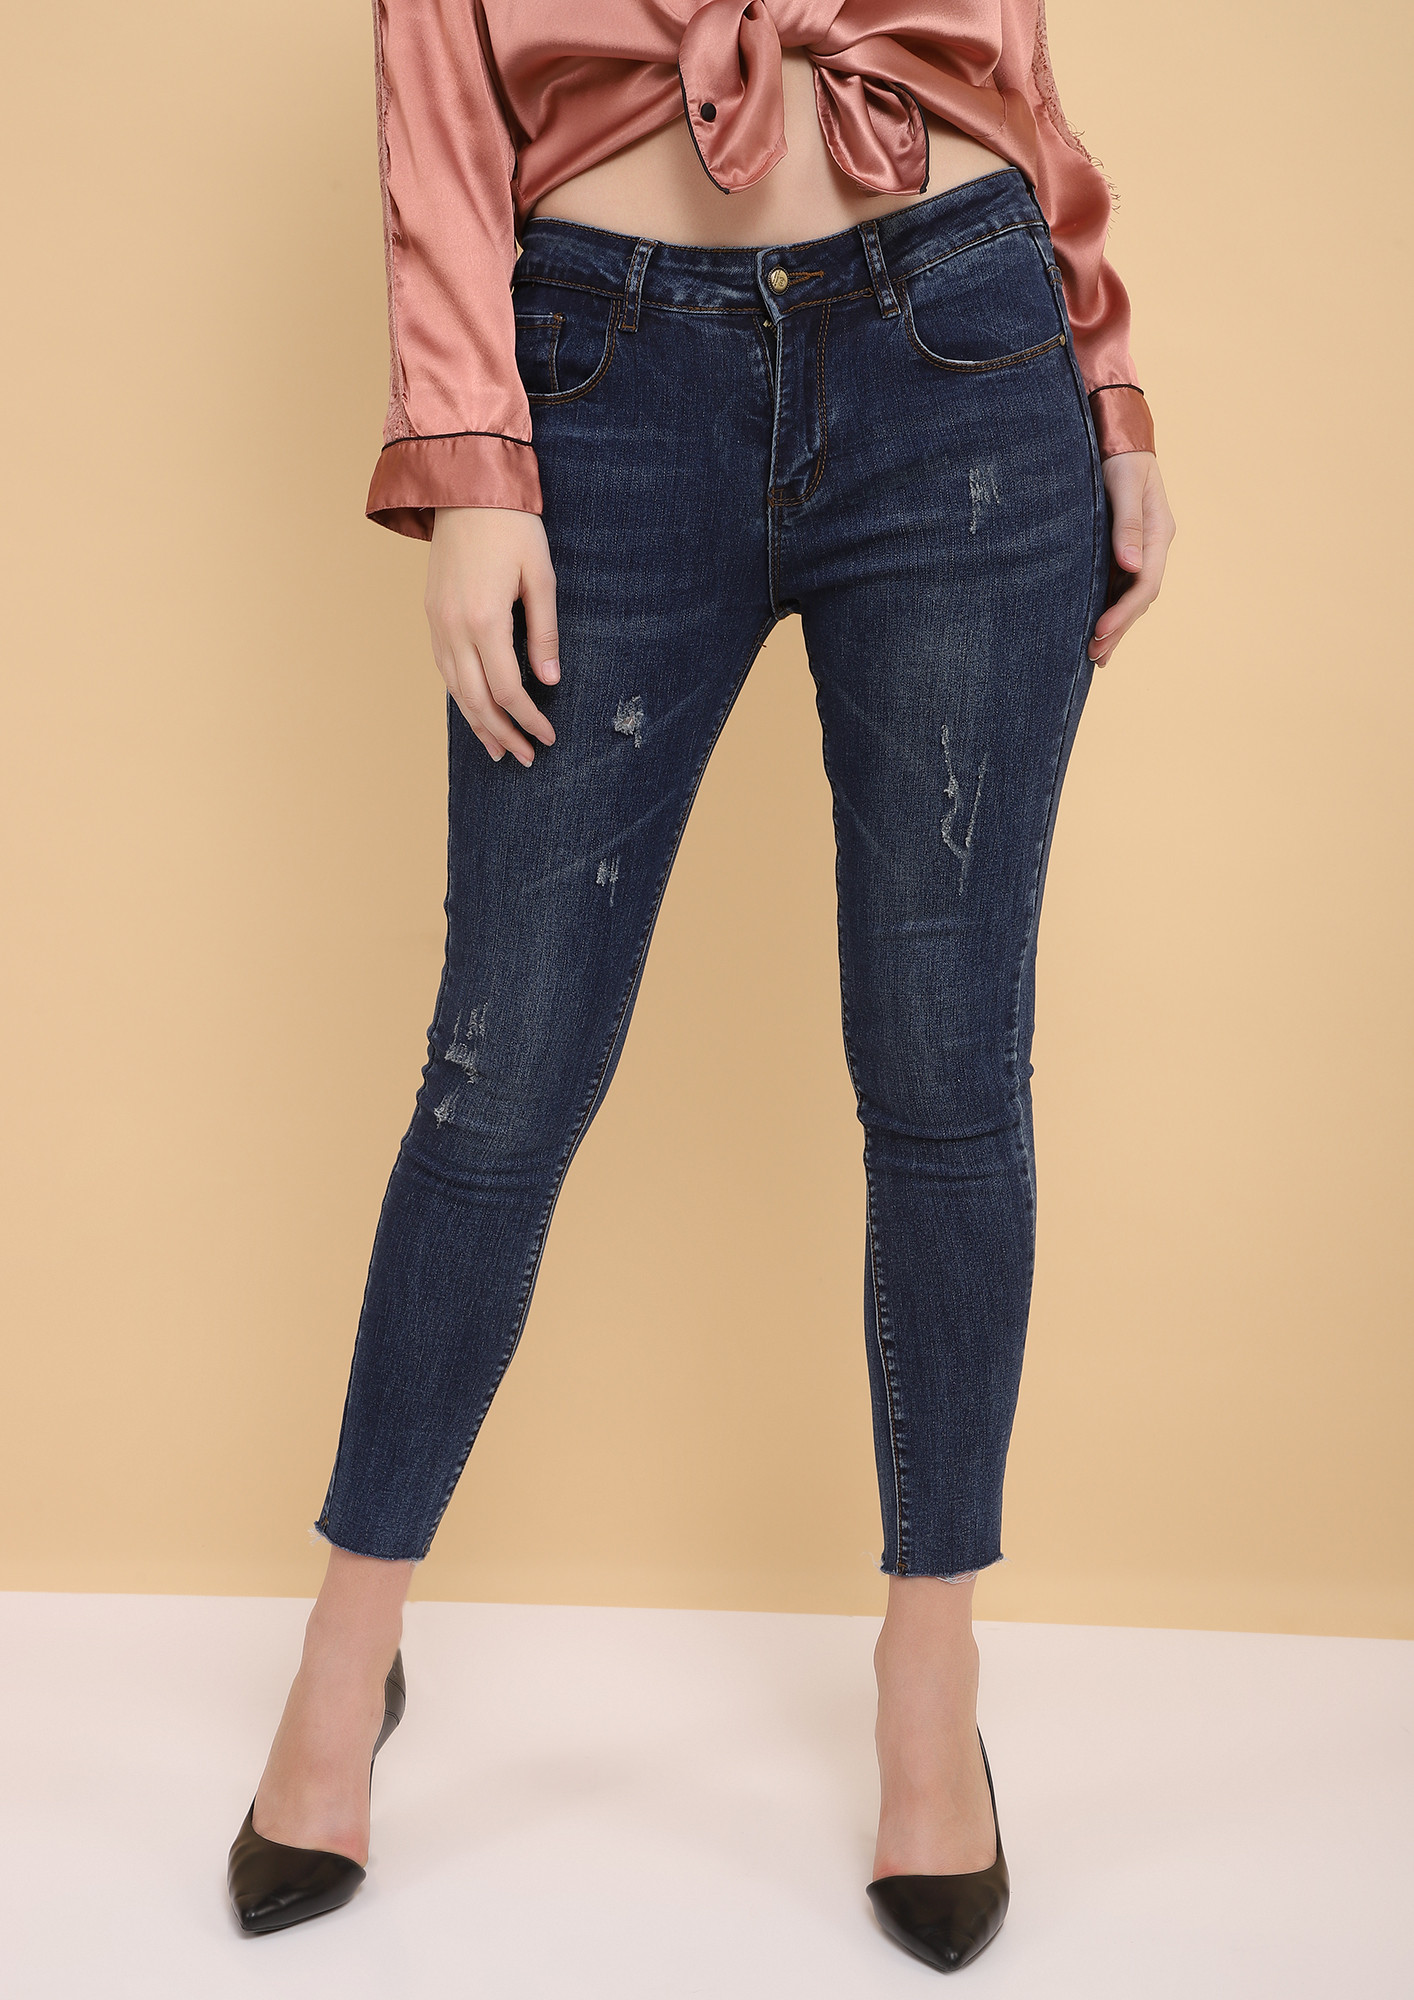 THE KEY CUT BLUE CROPPED JEANS